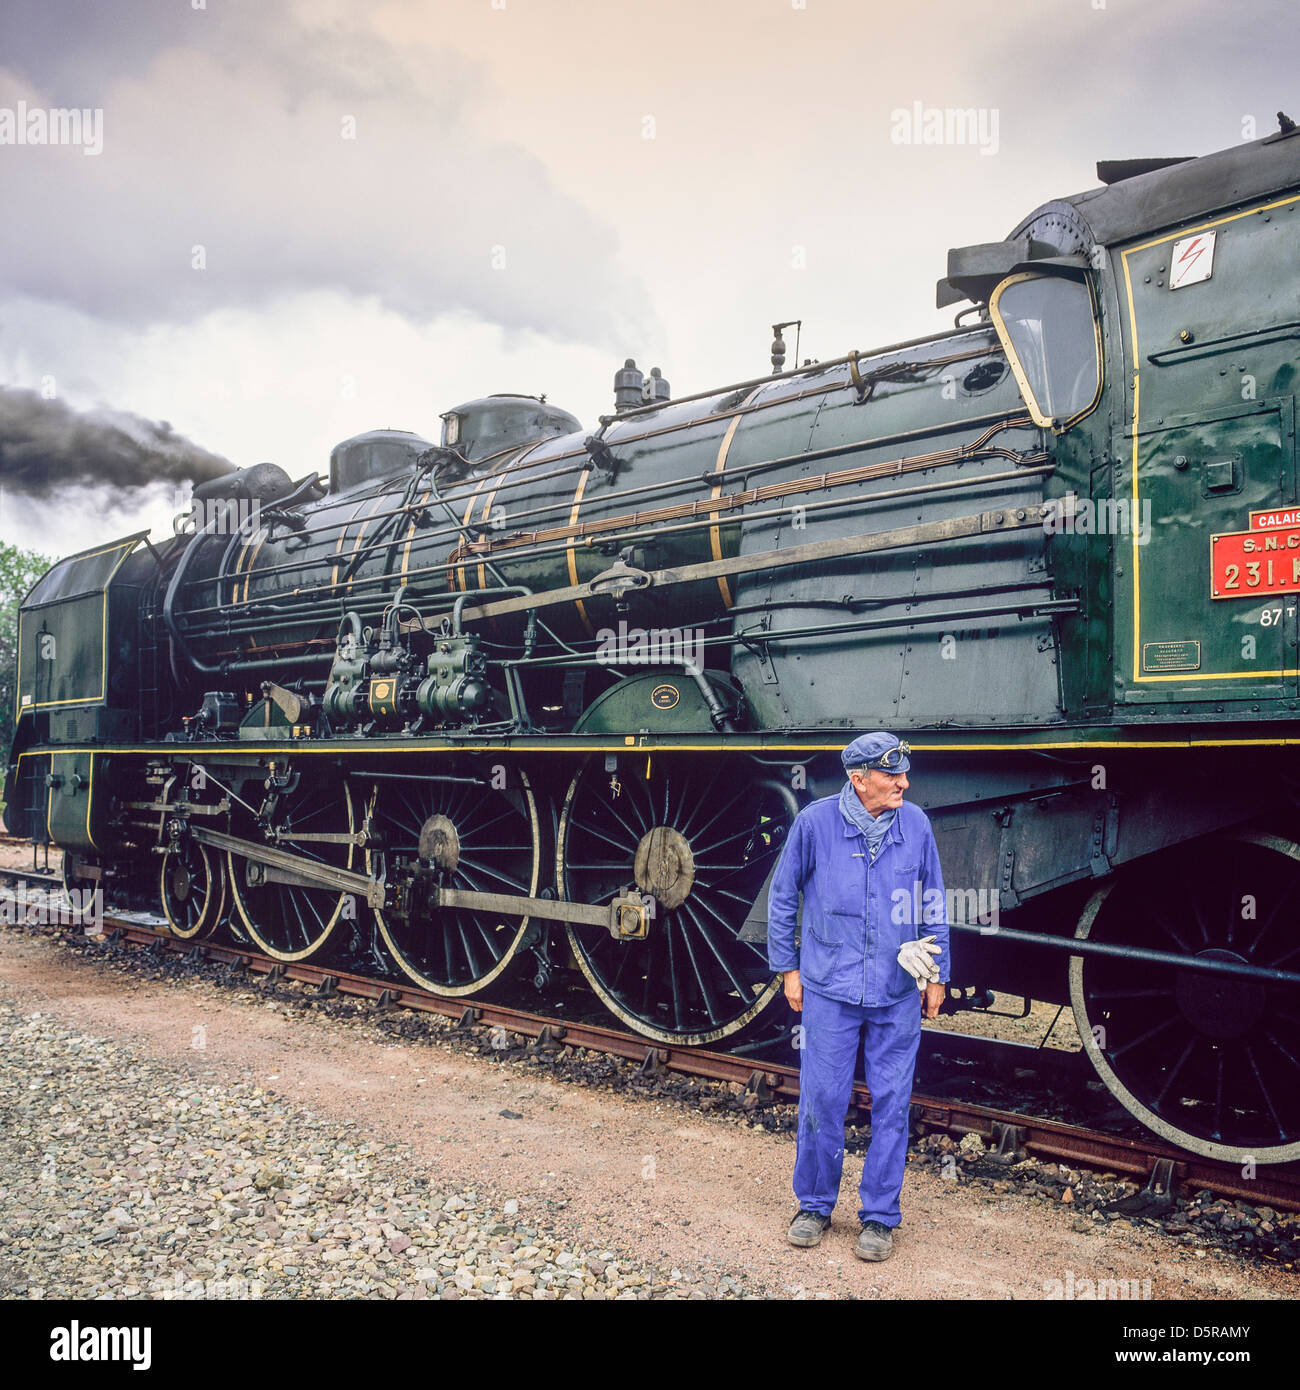 Engineer with historic steam locomotive 'Pacific PLM 231 K 8' of 'Paimpol-Pontrieux' train Brittany France Europe Stock Photo